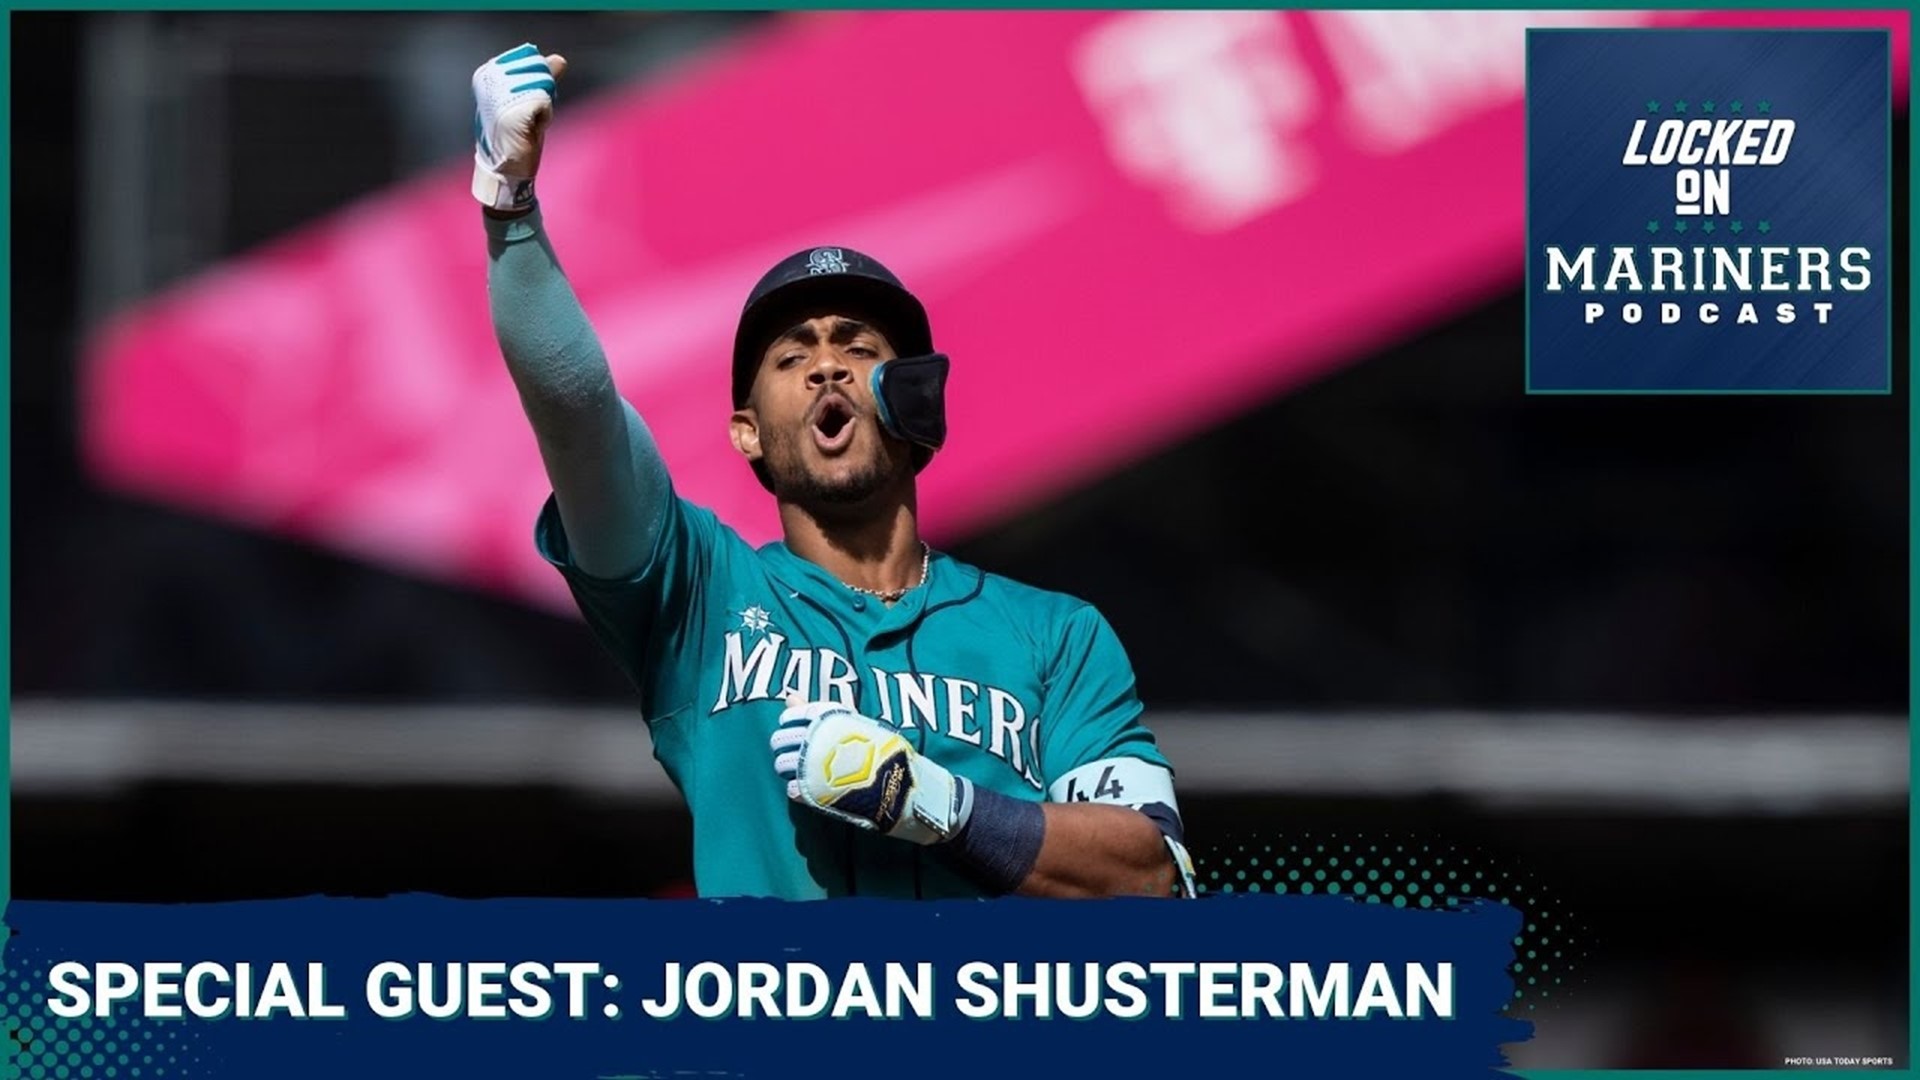 Jordan Shusterman, one-half of the Céspedes Family BBQ duo and FOX Sports MLB writer, joins the show to discuss the Mariners' playoff hopes.